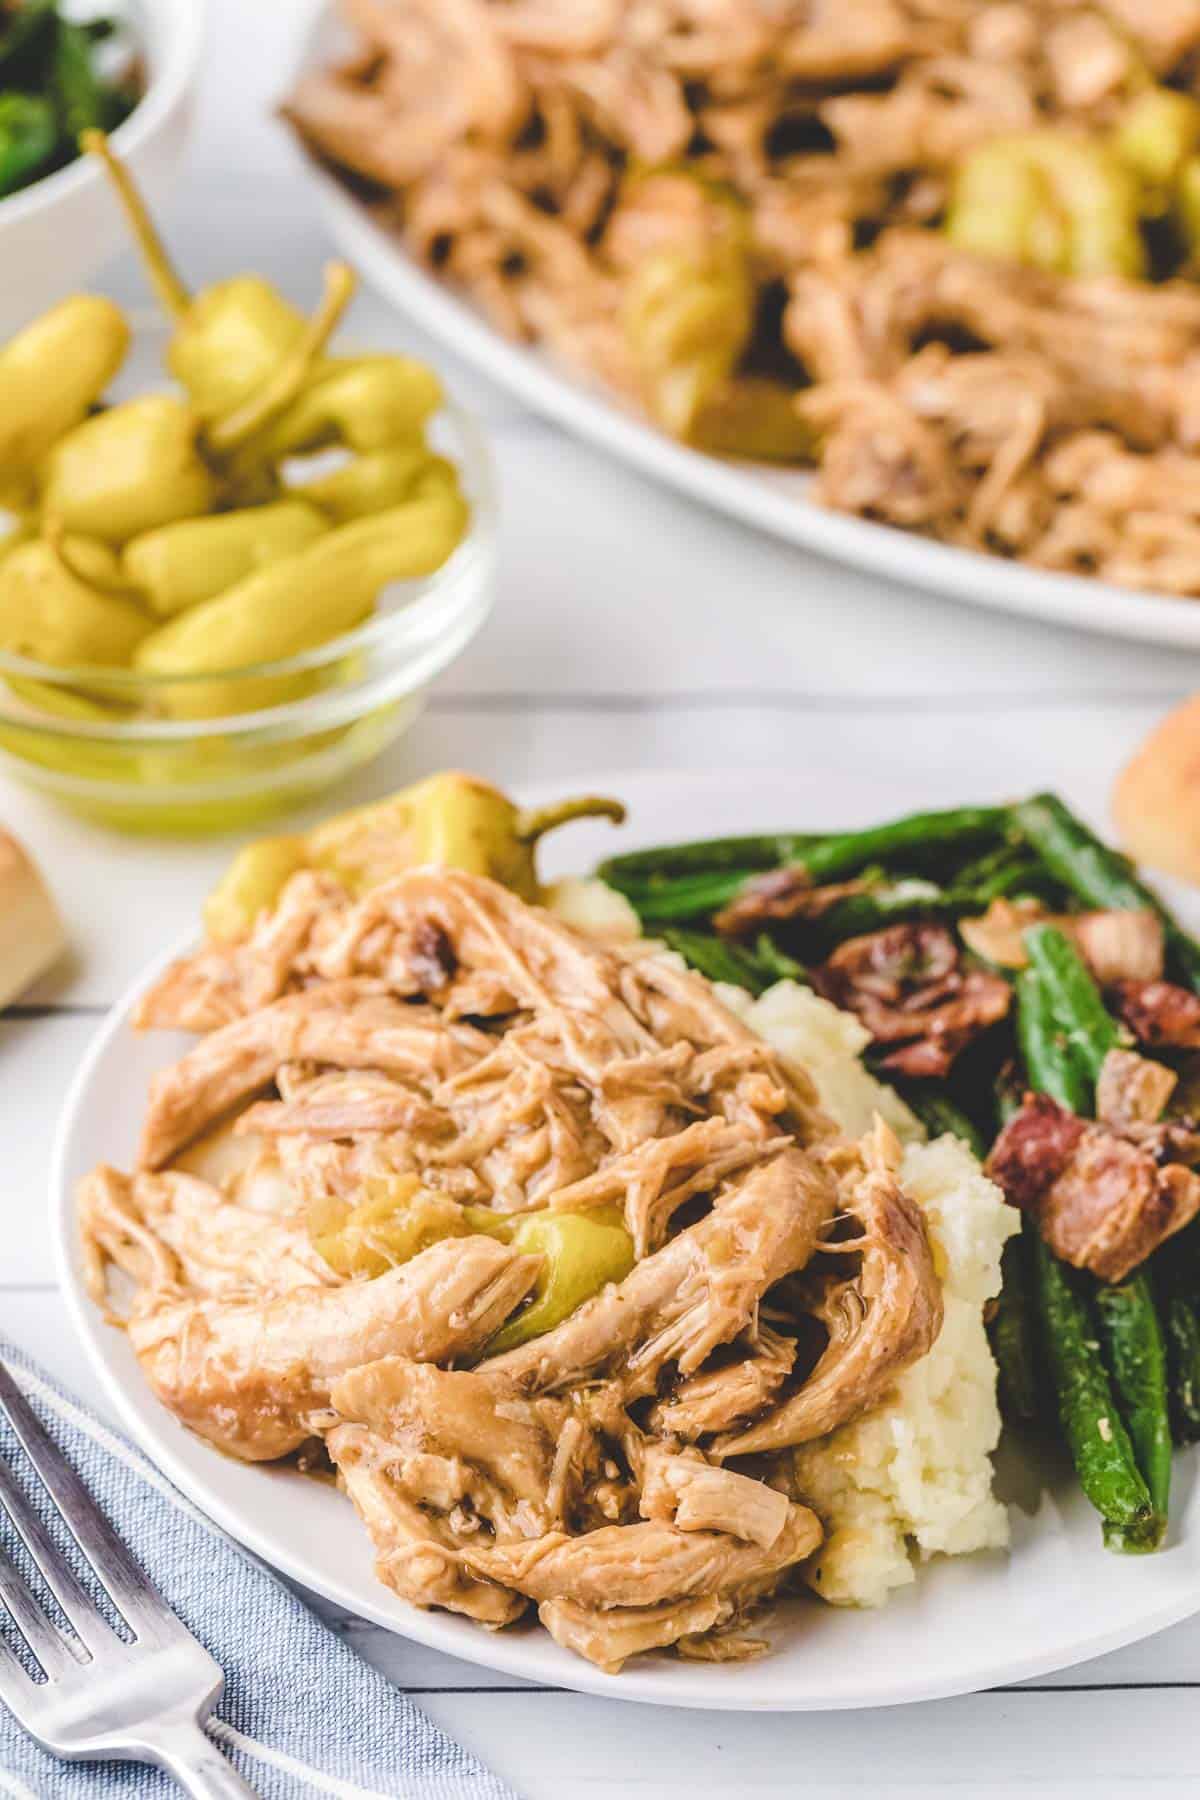 A plate of Mississippi Chicken served over mashed potatoes with green beans.